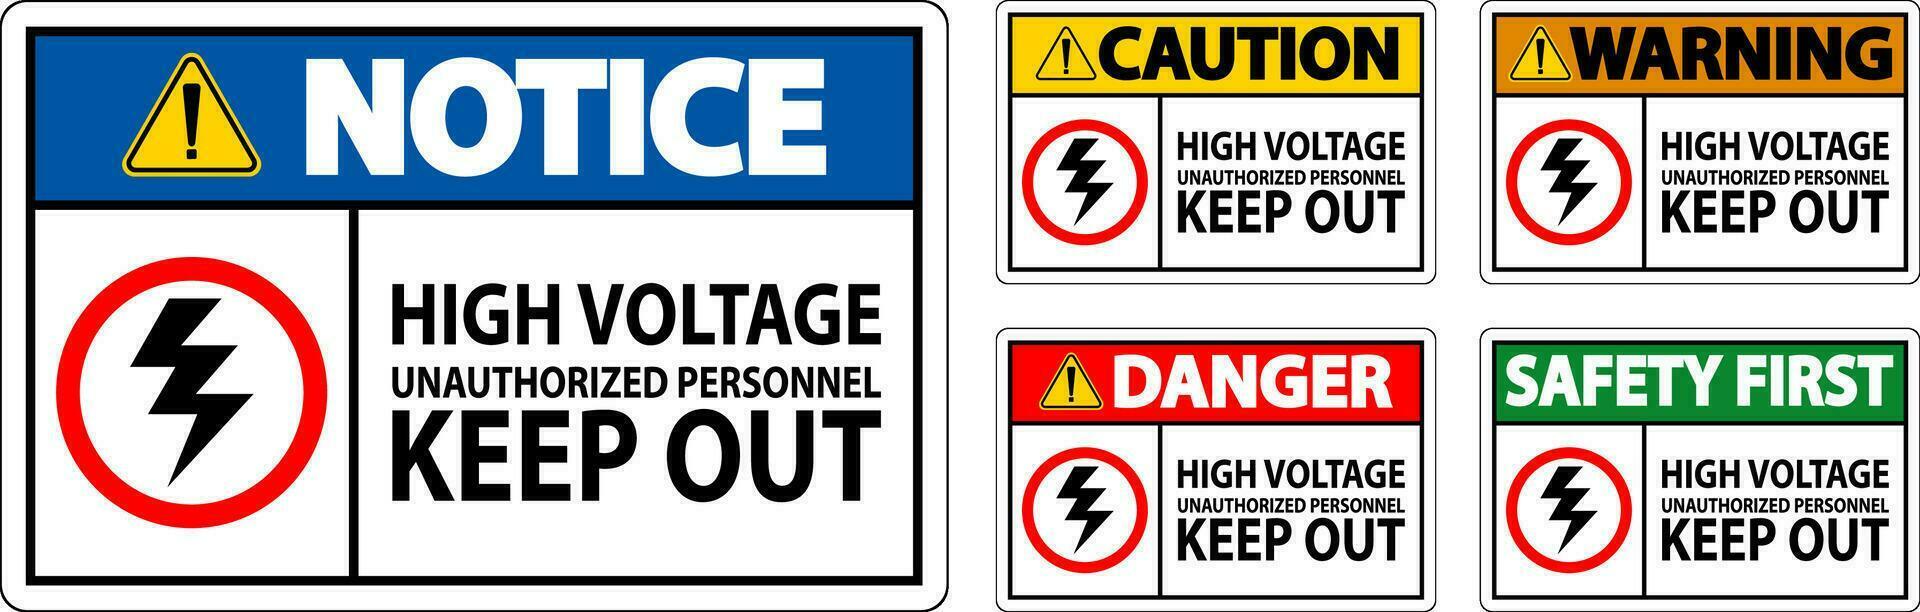 Danger Sign High Voltage Unauthorized Personnel Keep Out vector